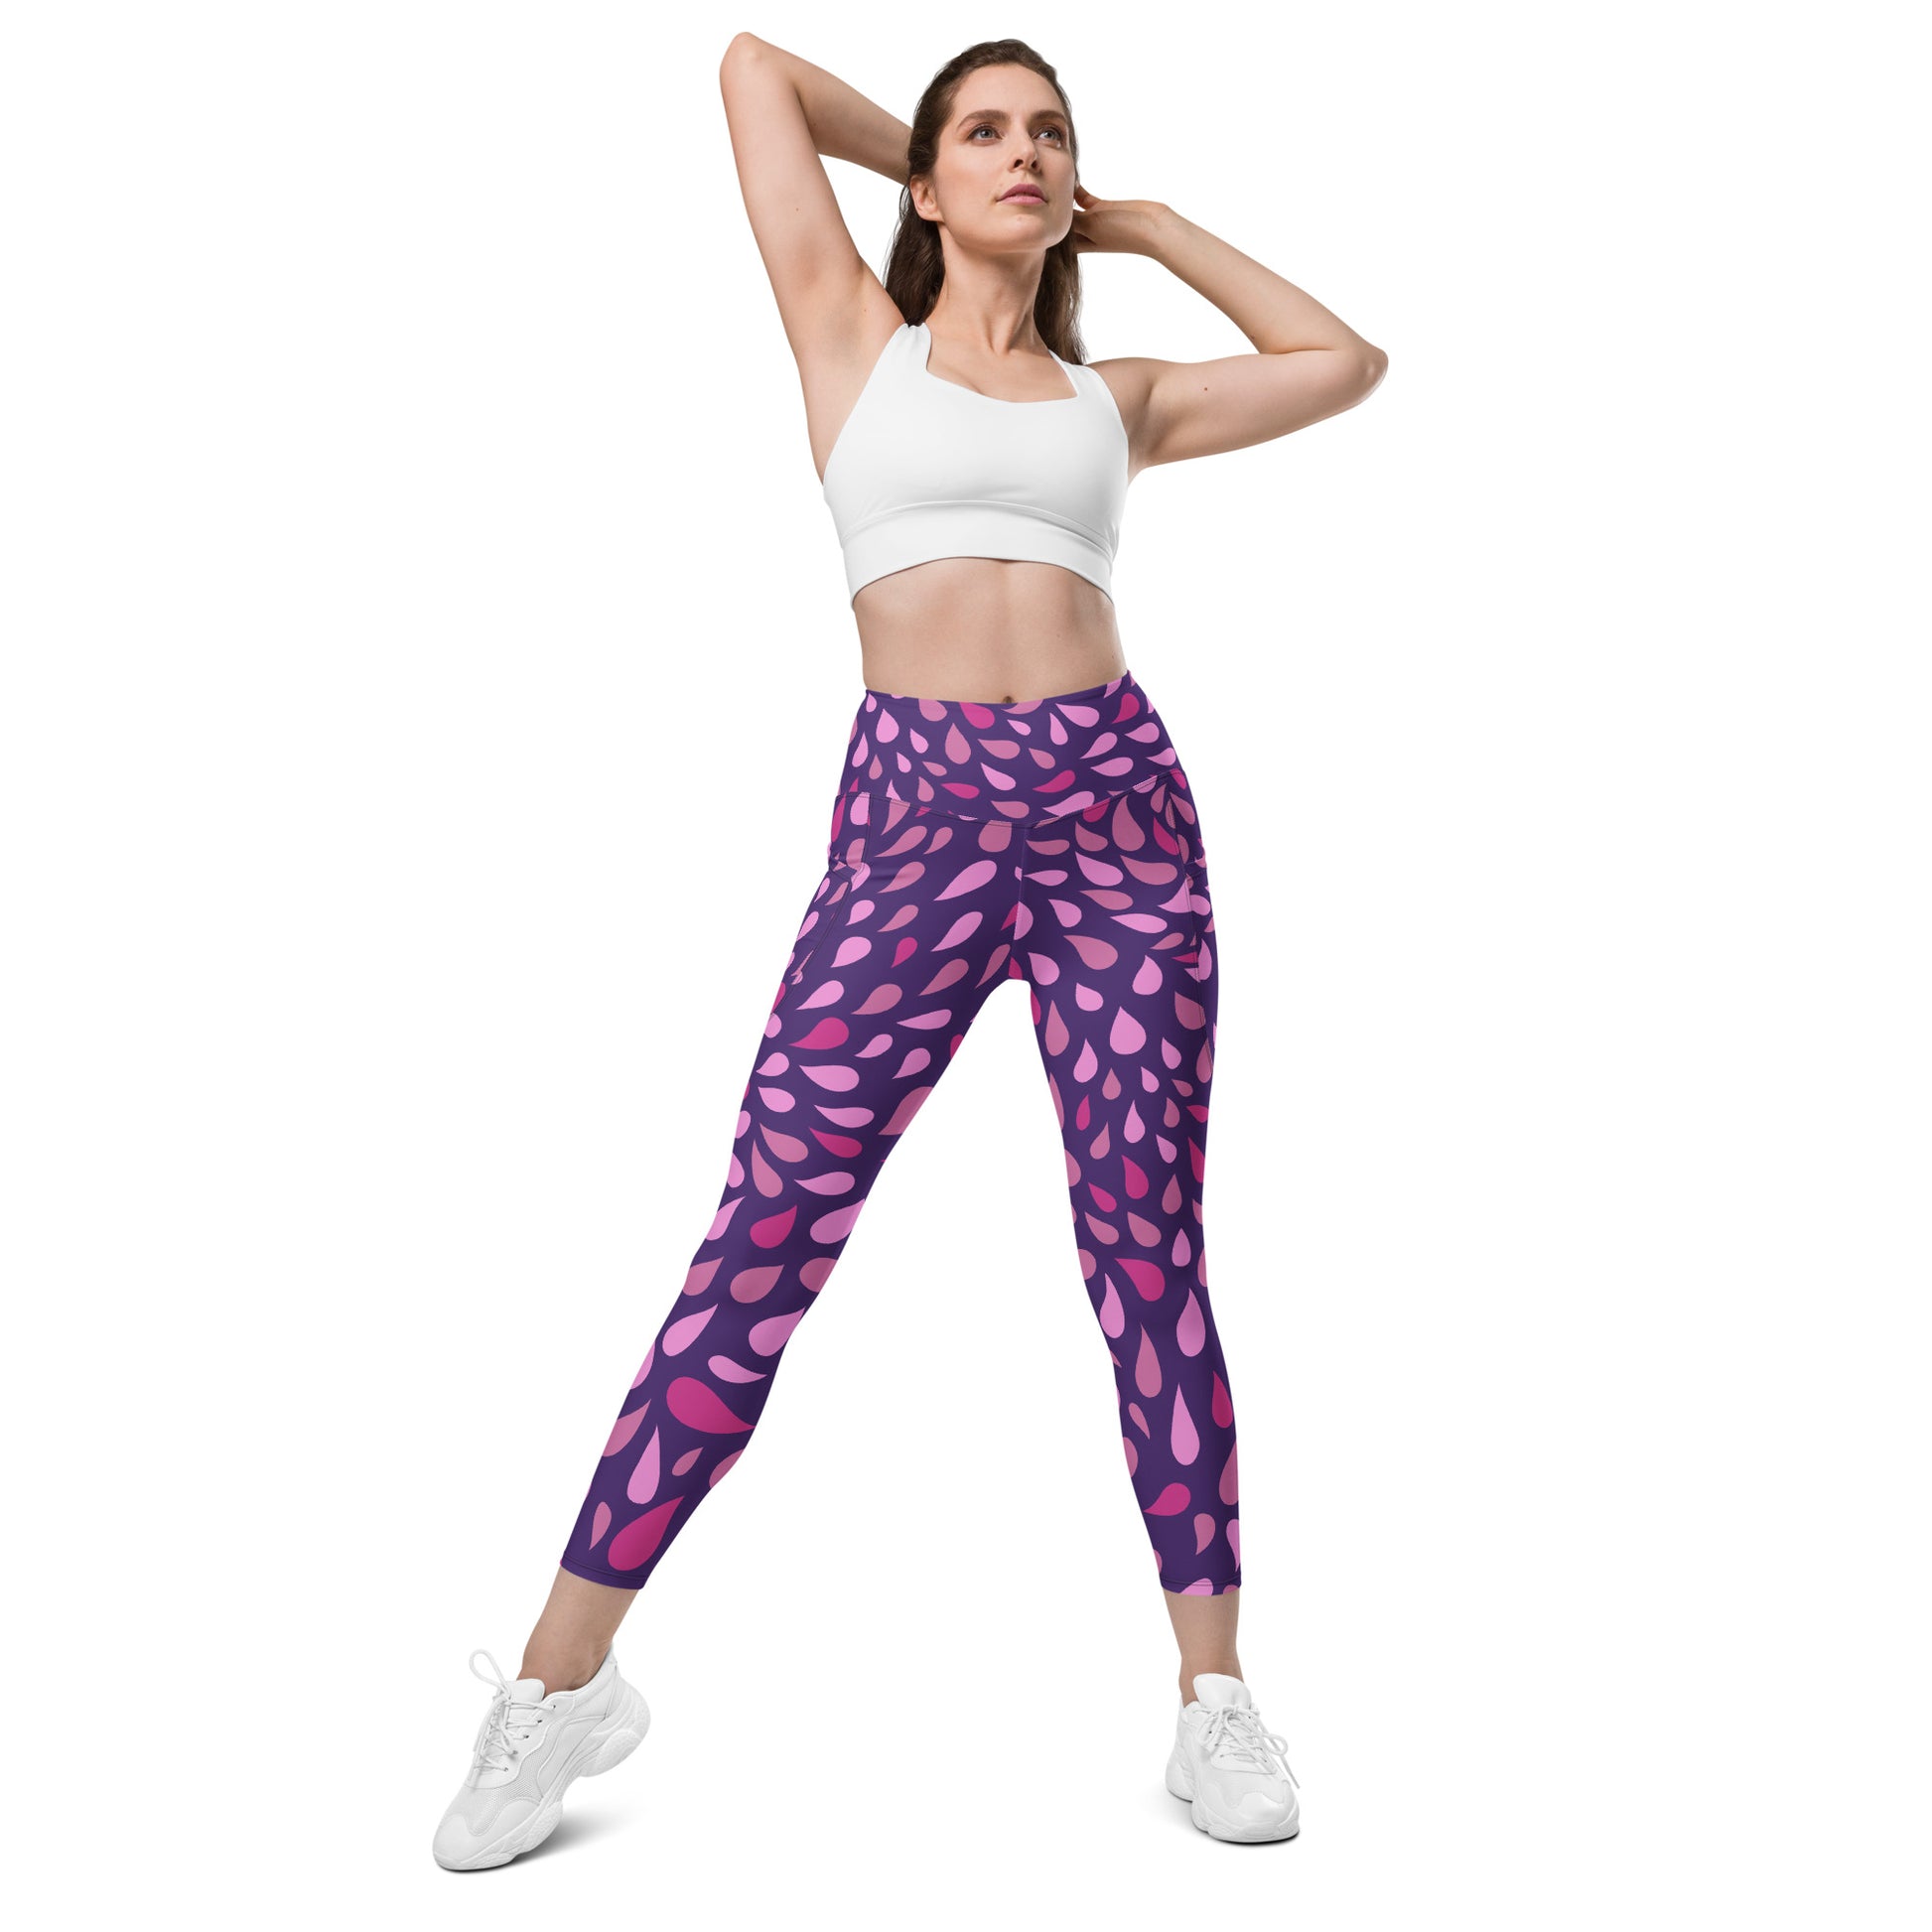 Purple Leaves - Leggings with pockets, 2XS - 6XL Leggings With Pockets 2XS - 6XL (US)